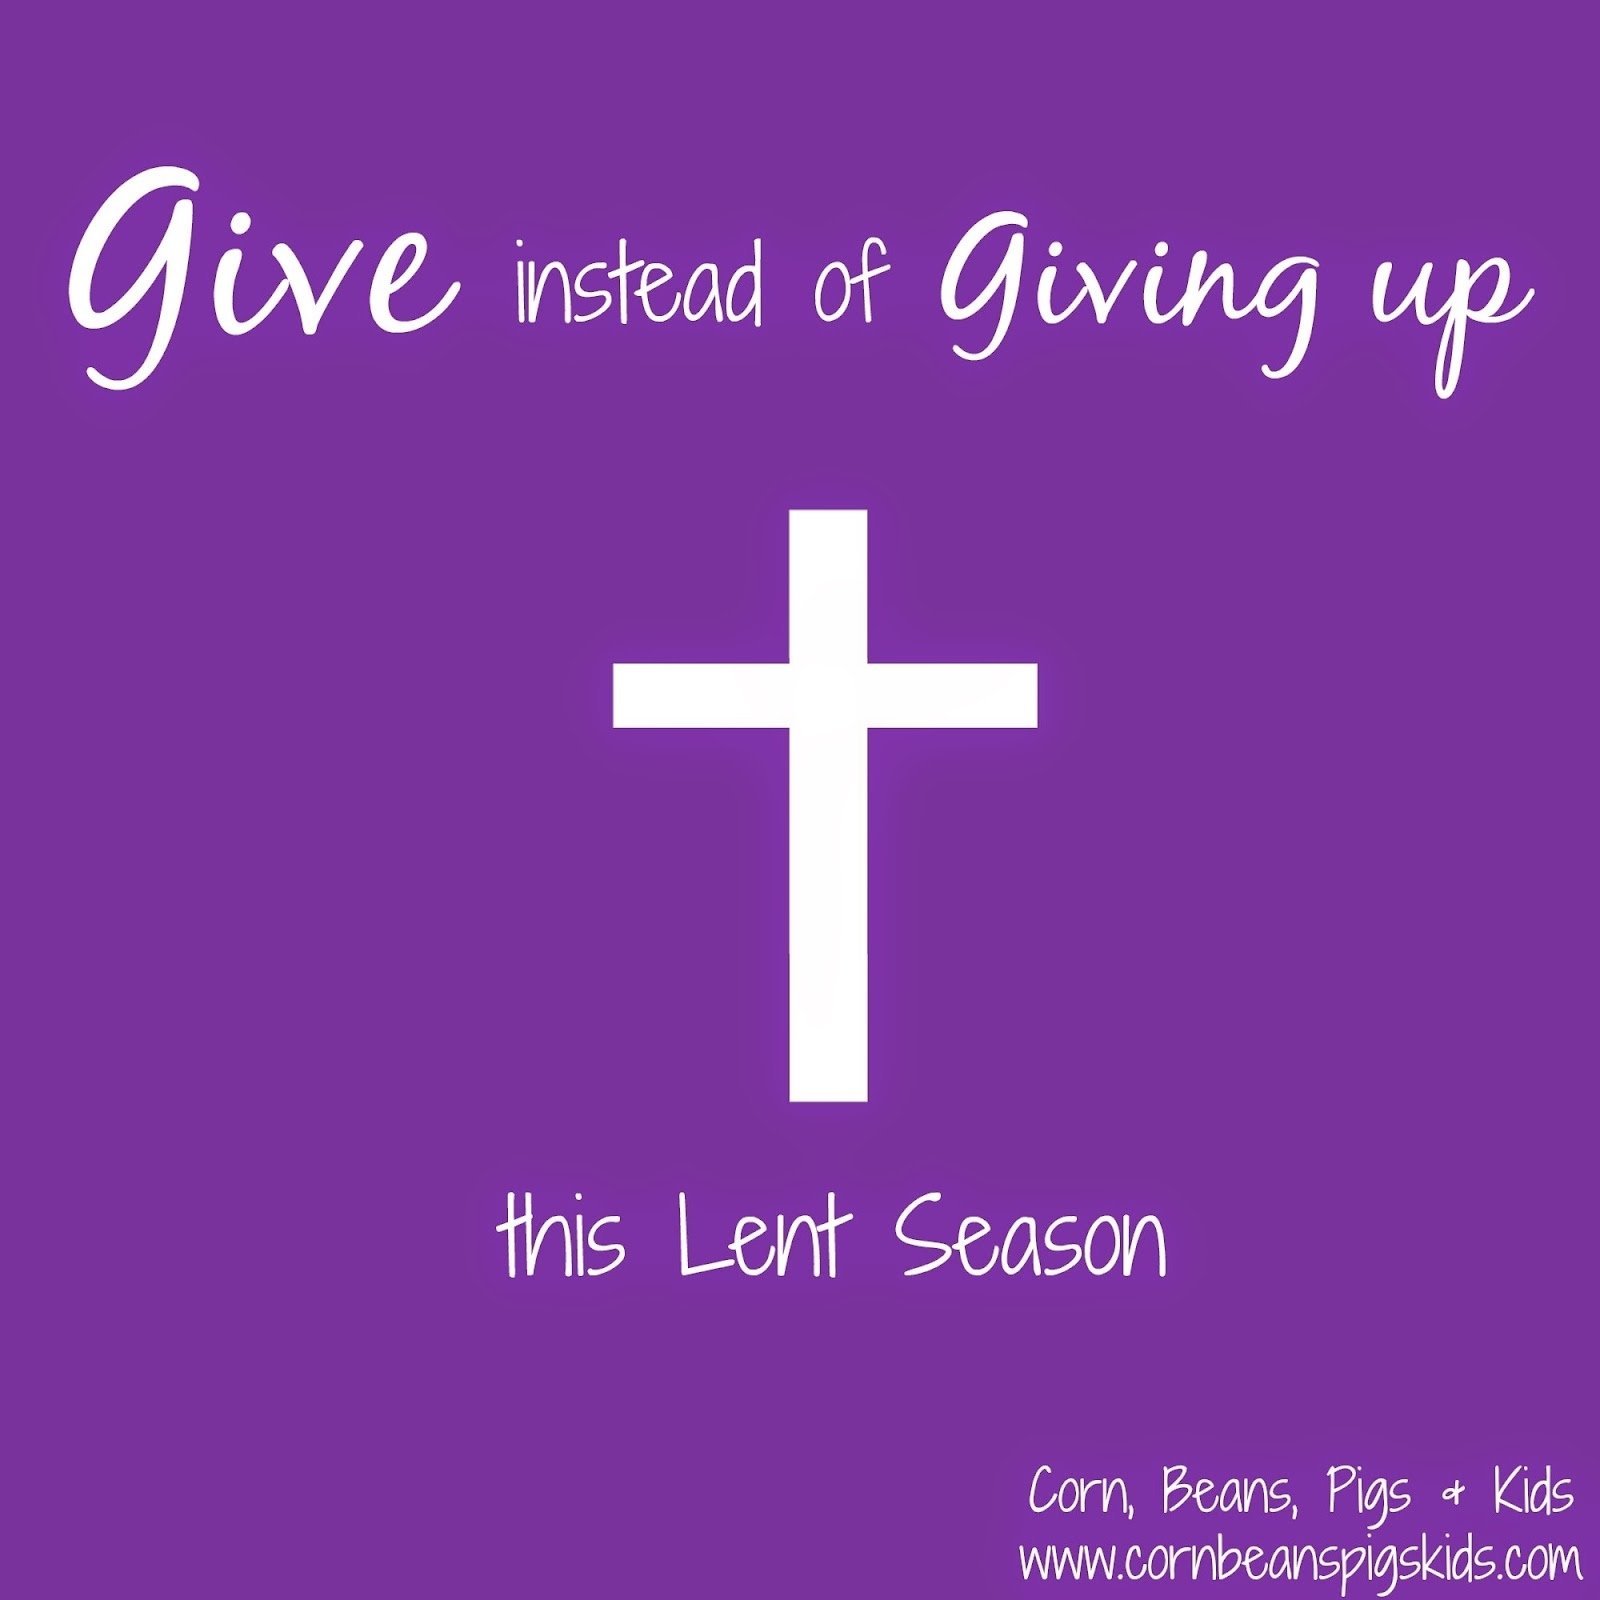 10 Awesome Ideas On What To Give Up For Lent corn beans pigs and kids give instead of giving up this lent 3 2022